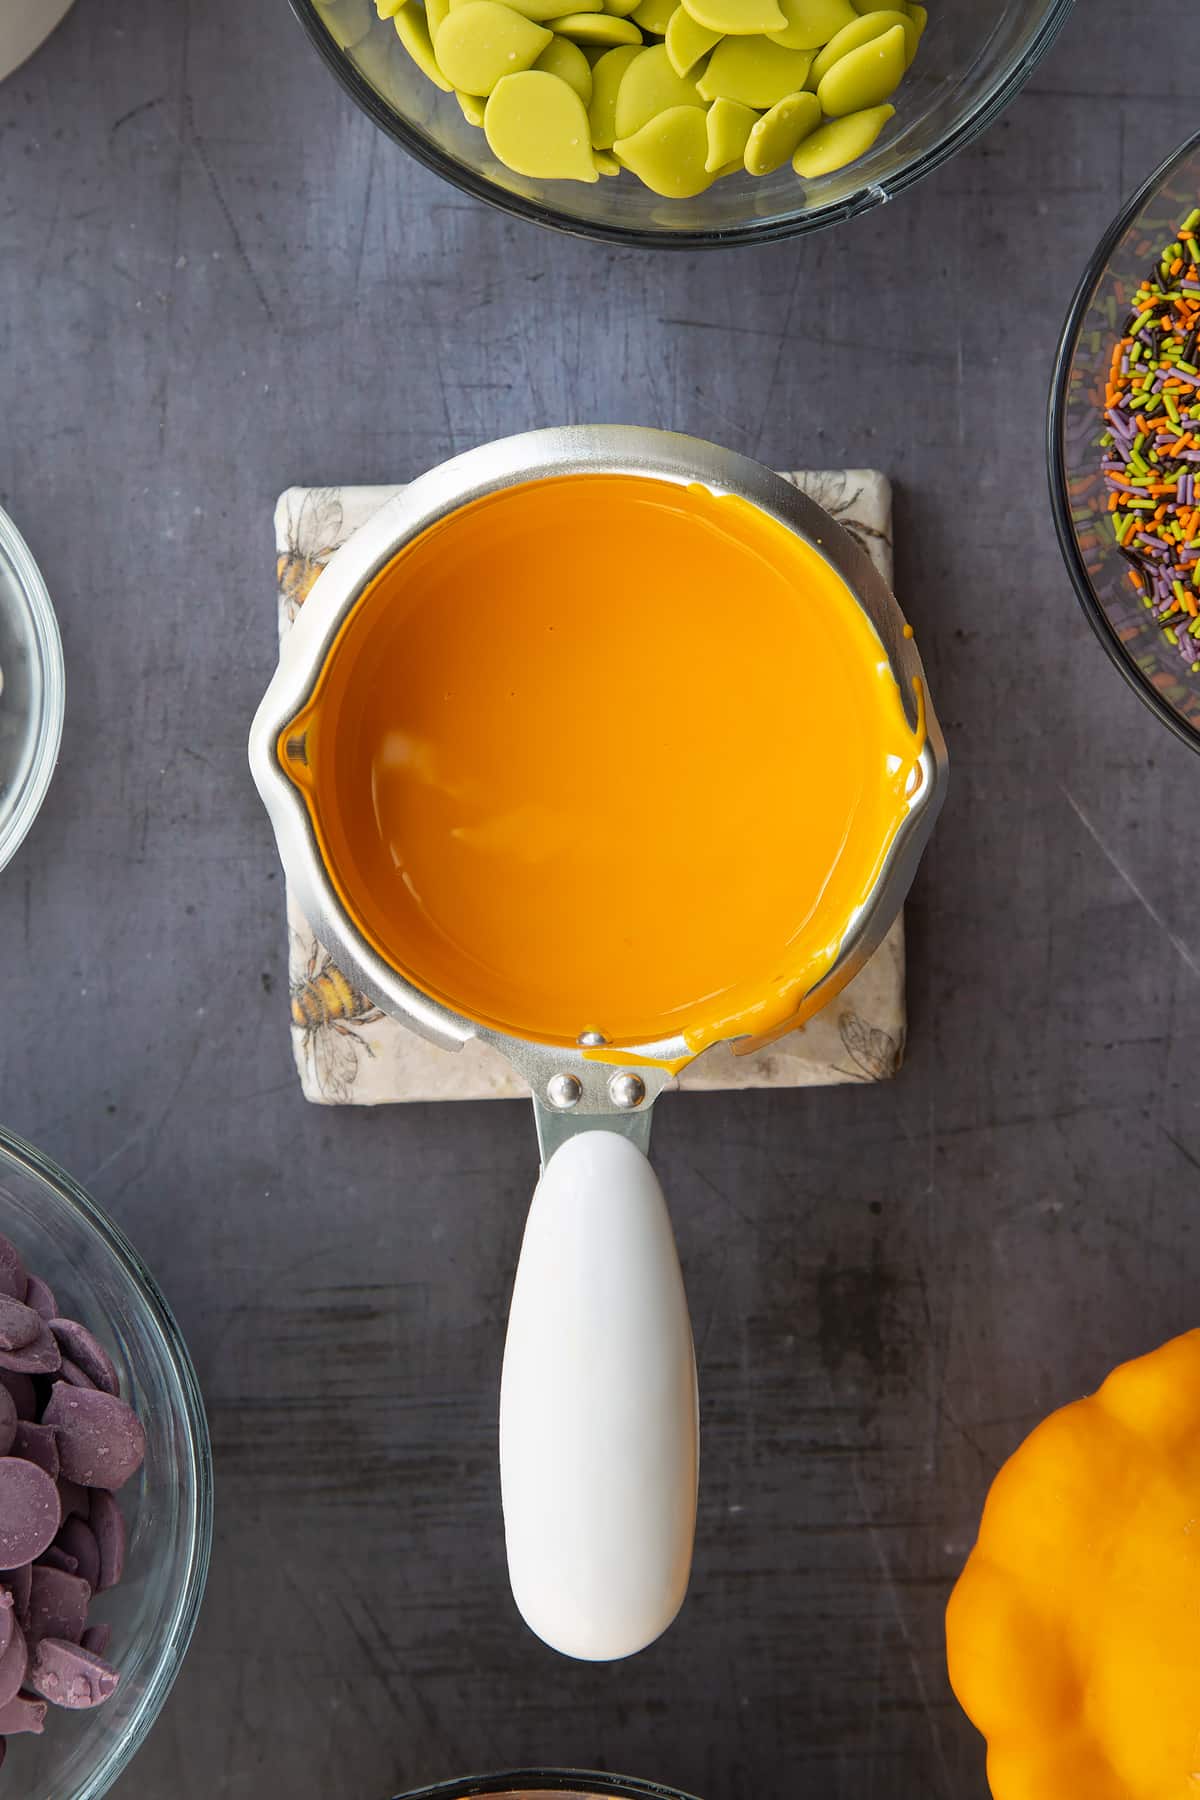 Orange candy melts in a little pan. Ingredients to make Halloween cake pops surround the pan.